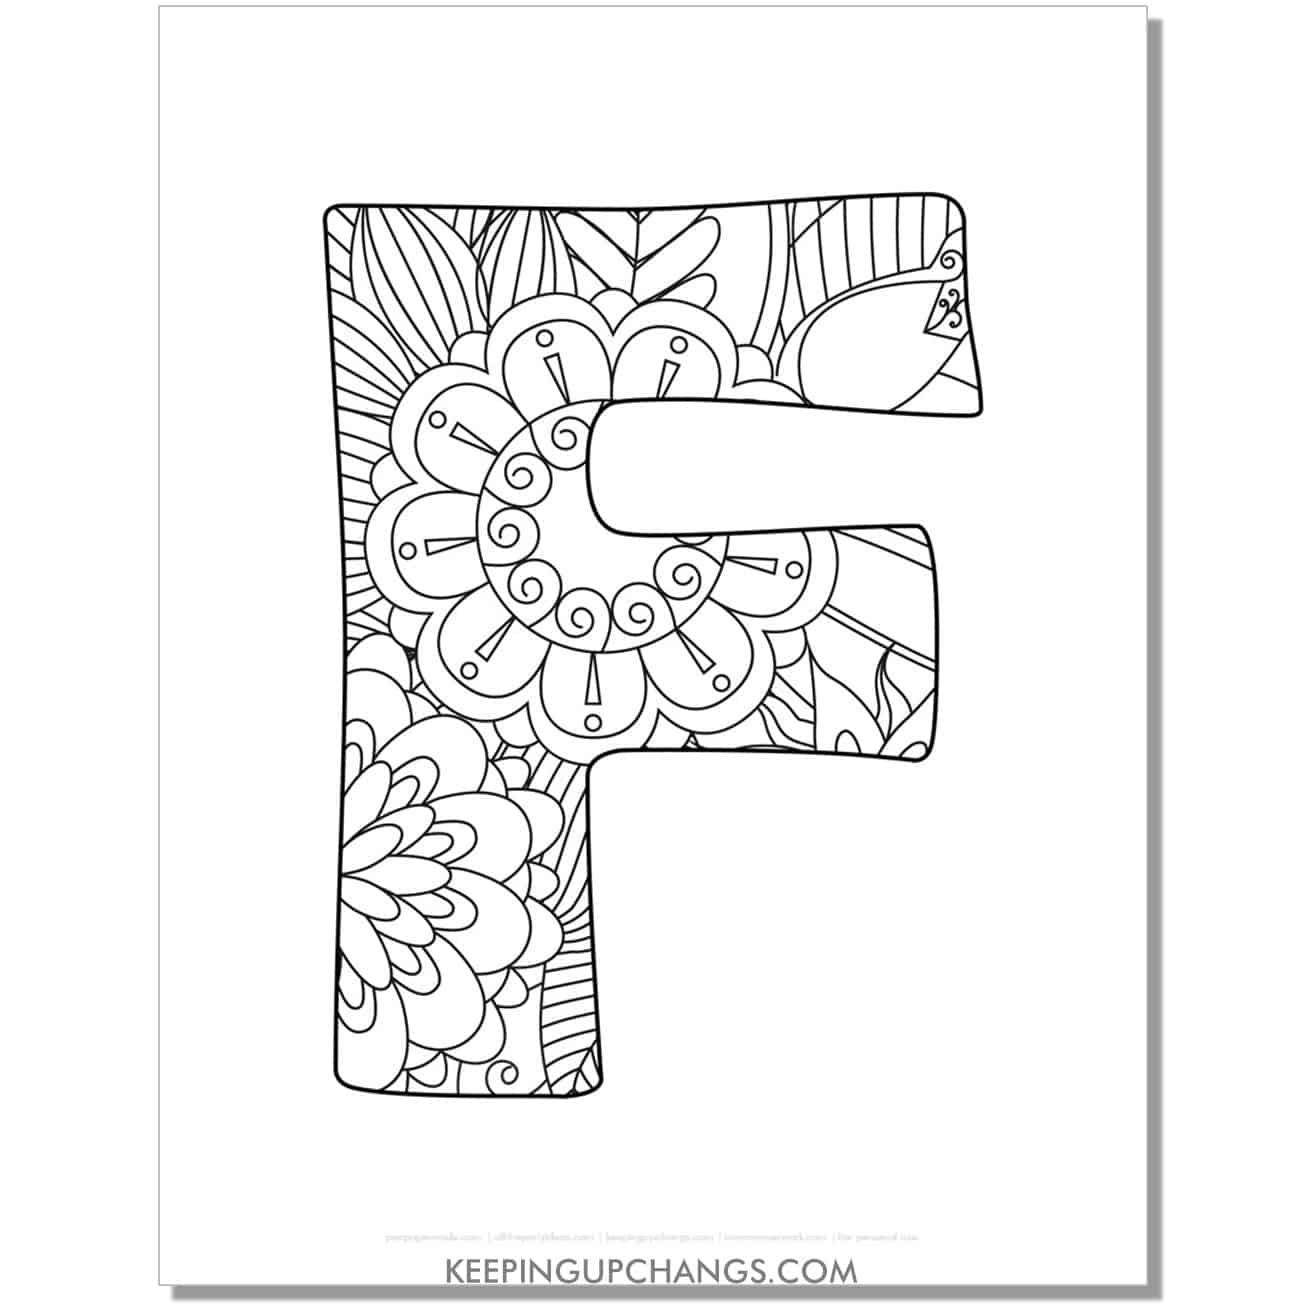 free letter f to color, complex mandala zentangle for adults.